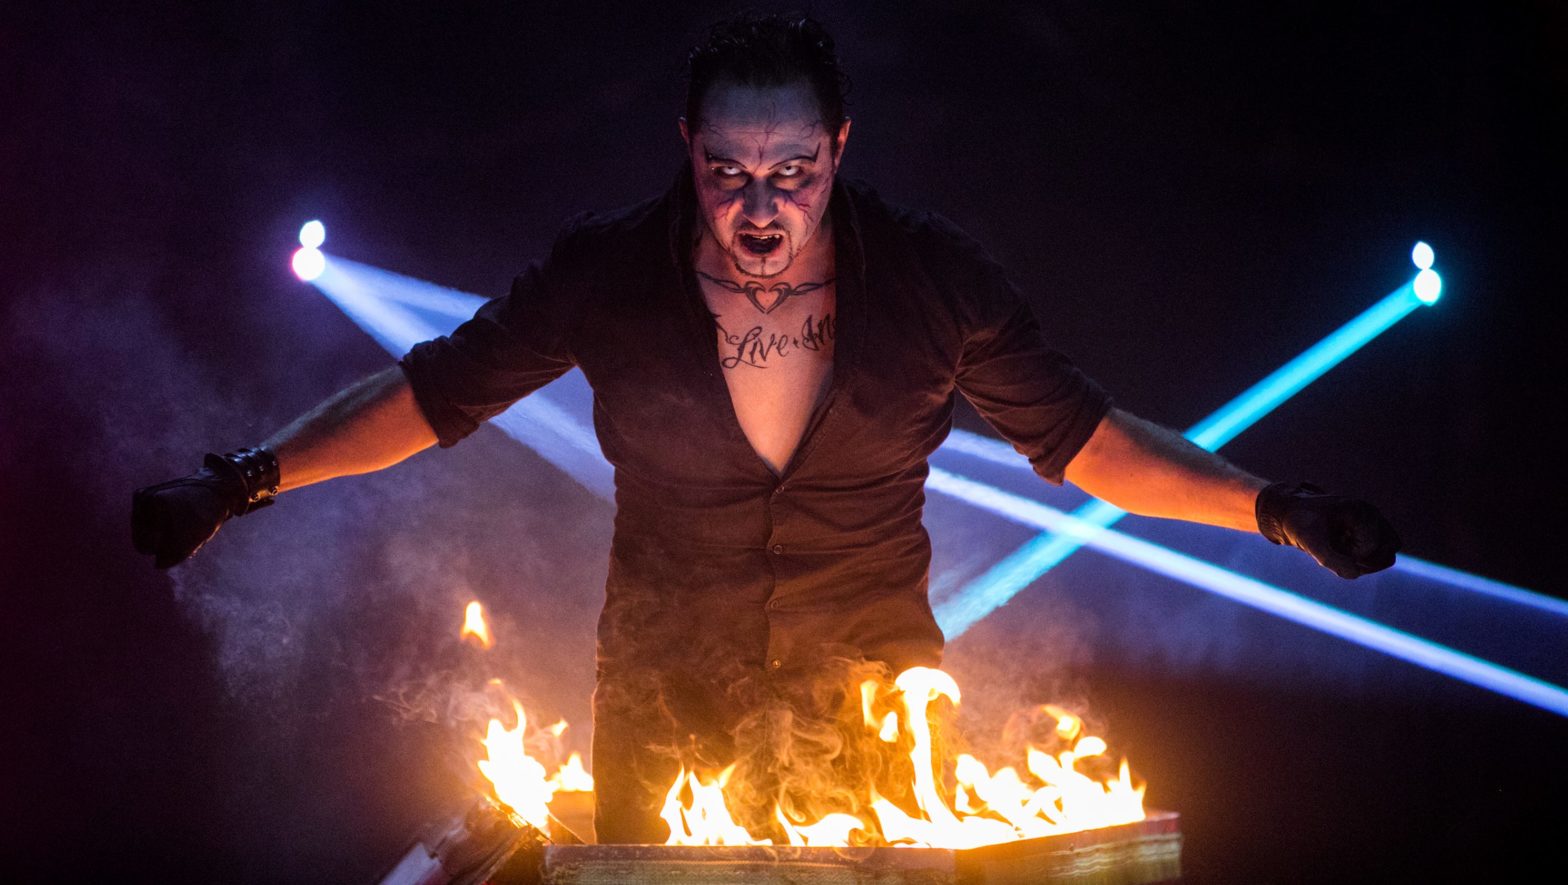 "Paranormal Cirque" a spooky circus that will revive your worst